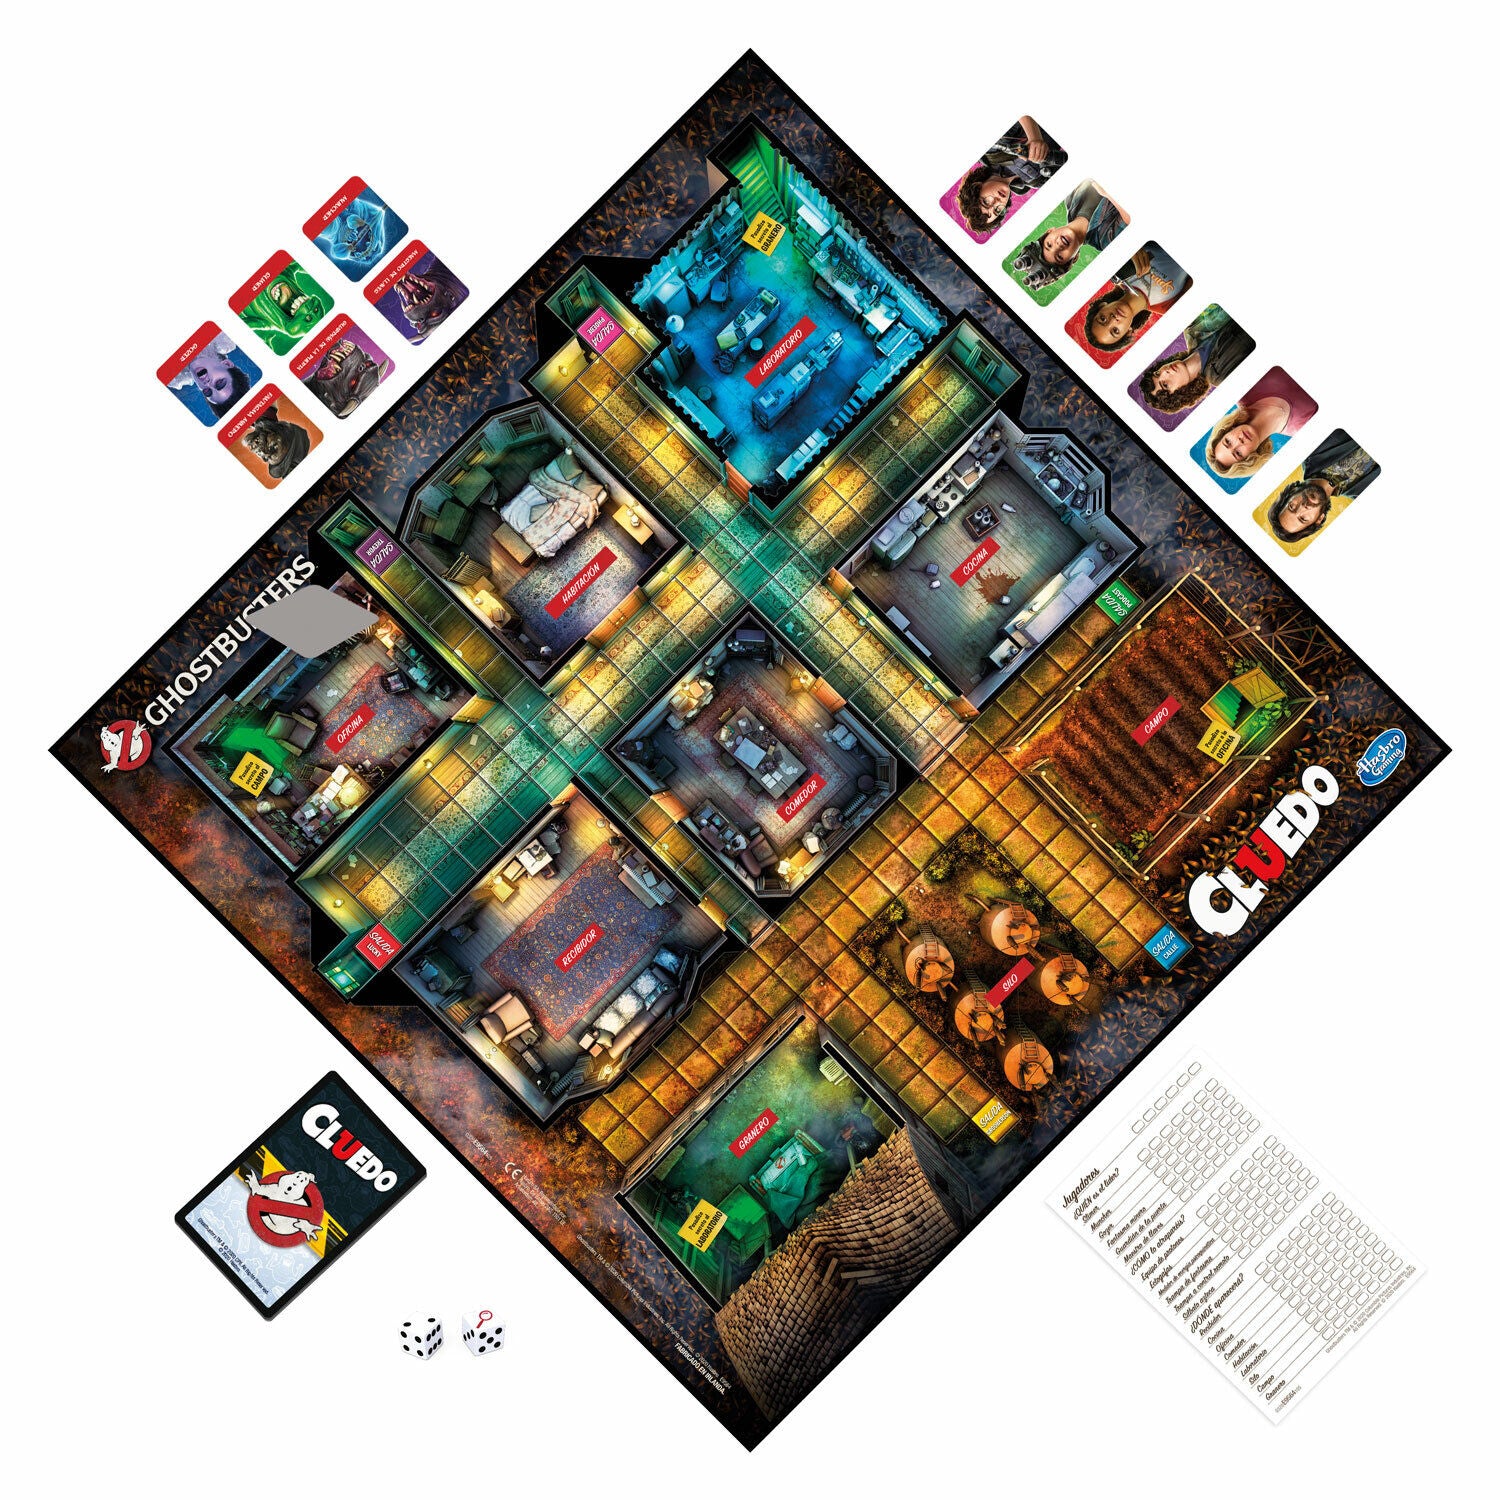 Cluedo: Ghostbusters Edition Board Game - NEW!